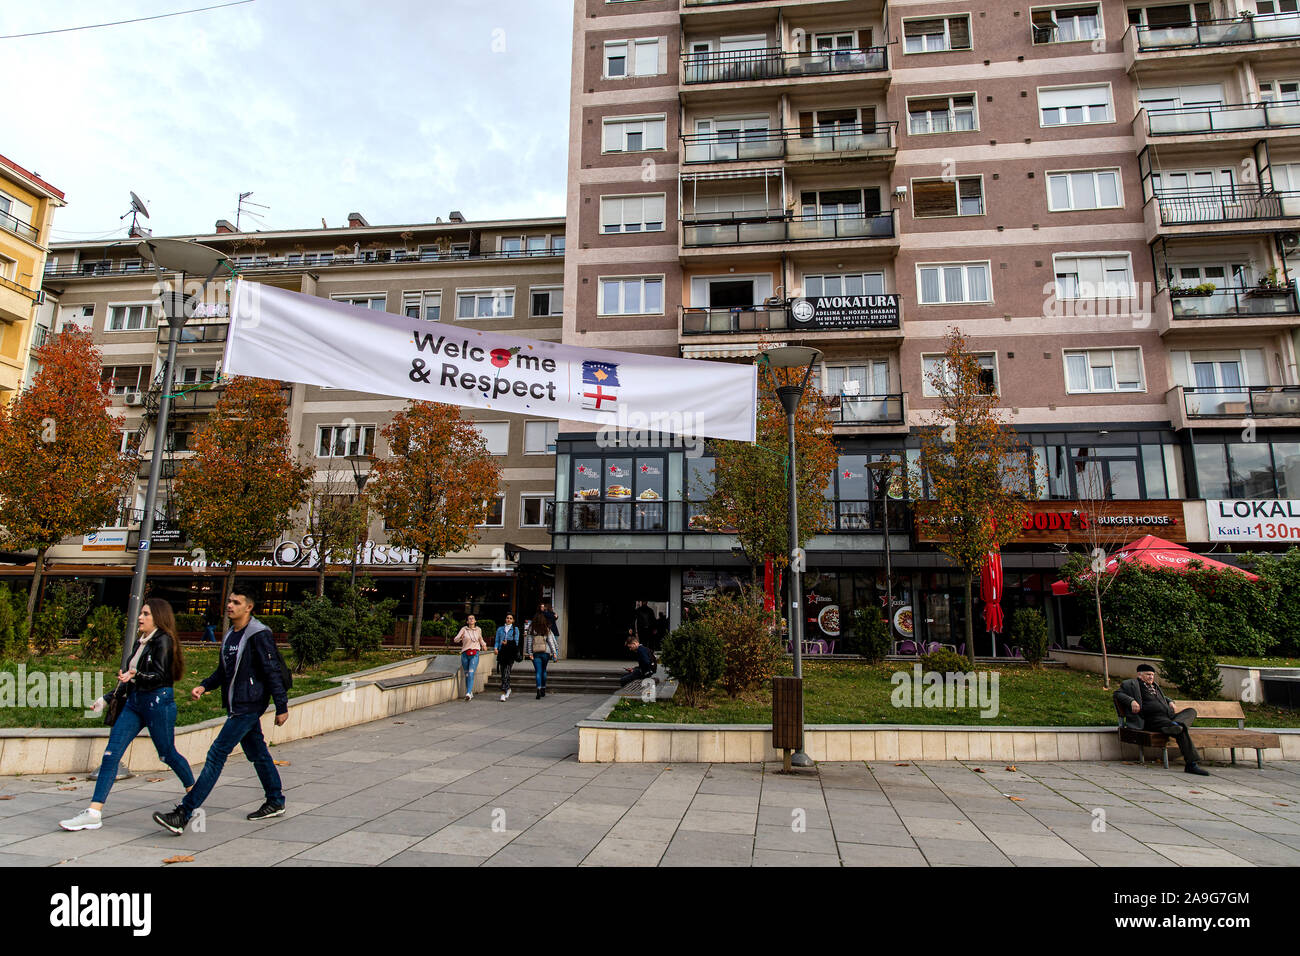 General view of welcome and respect banners in Pristina due the role in Kosovo's war in Pristina, Kosovo. Stock Photo